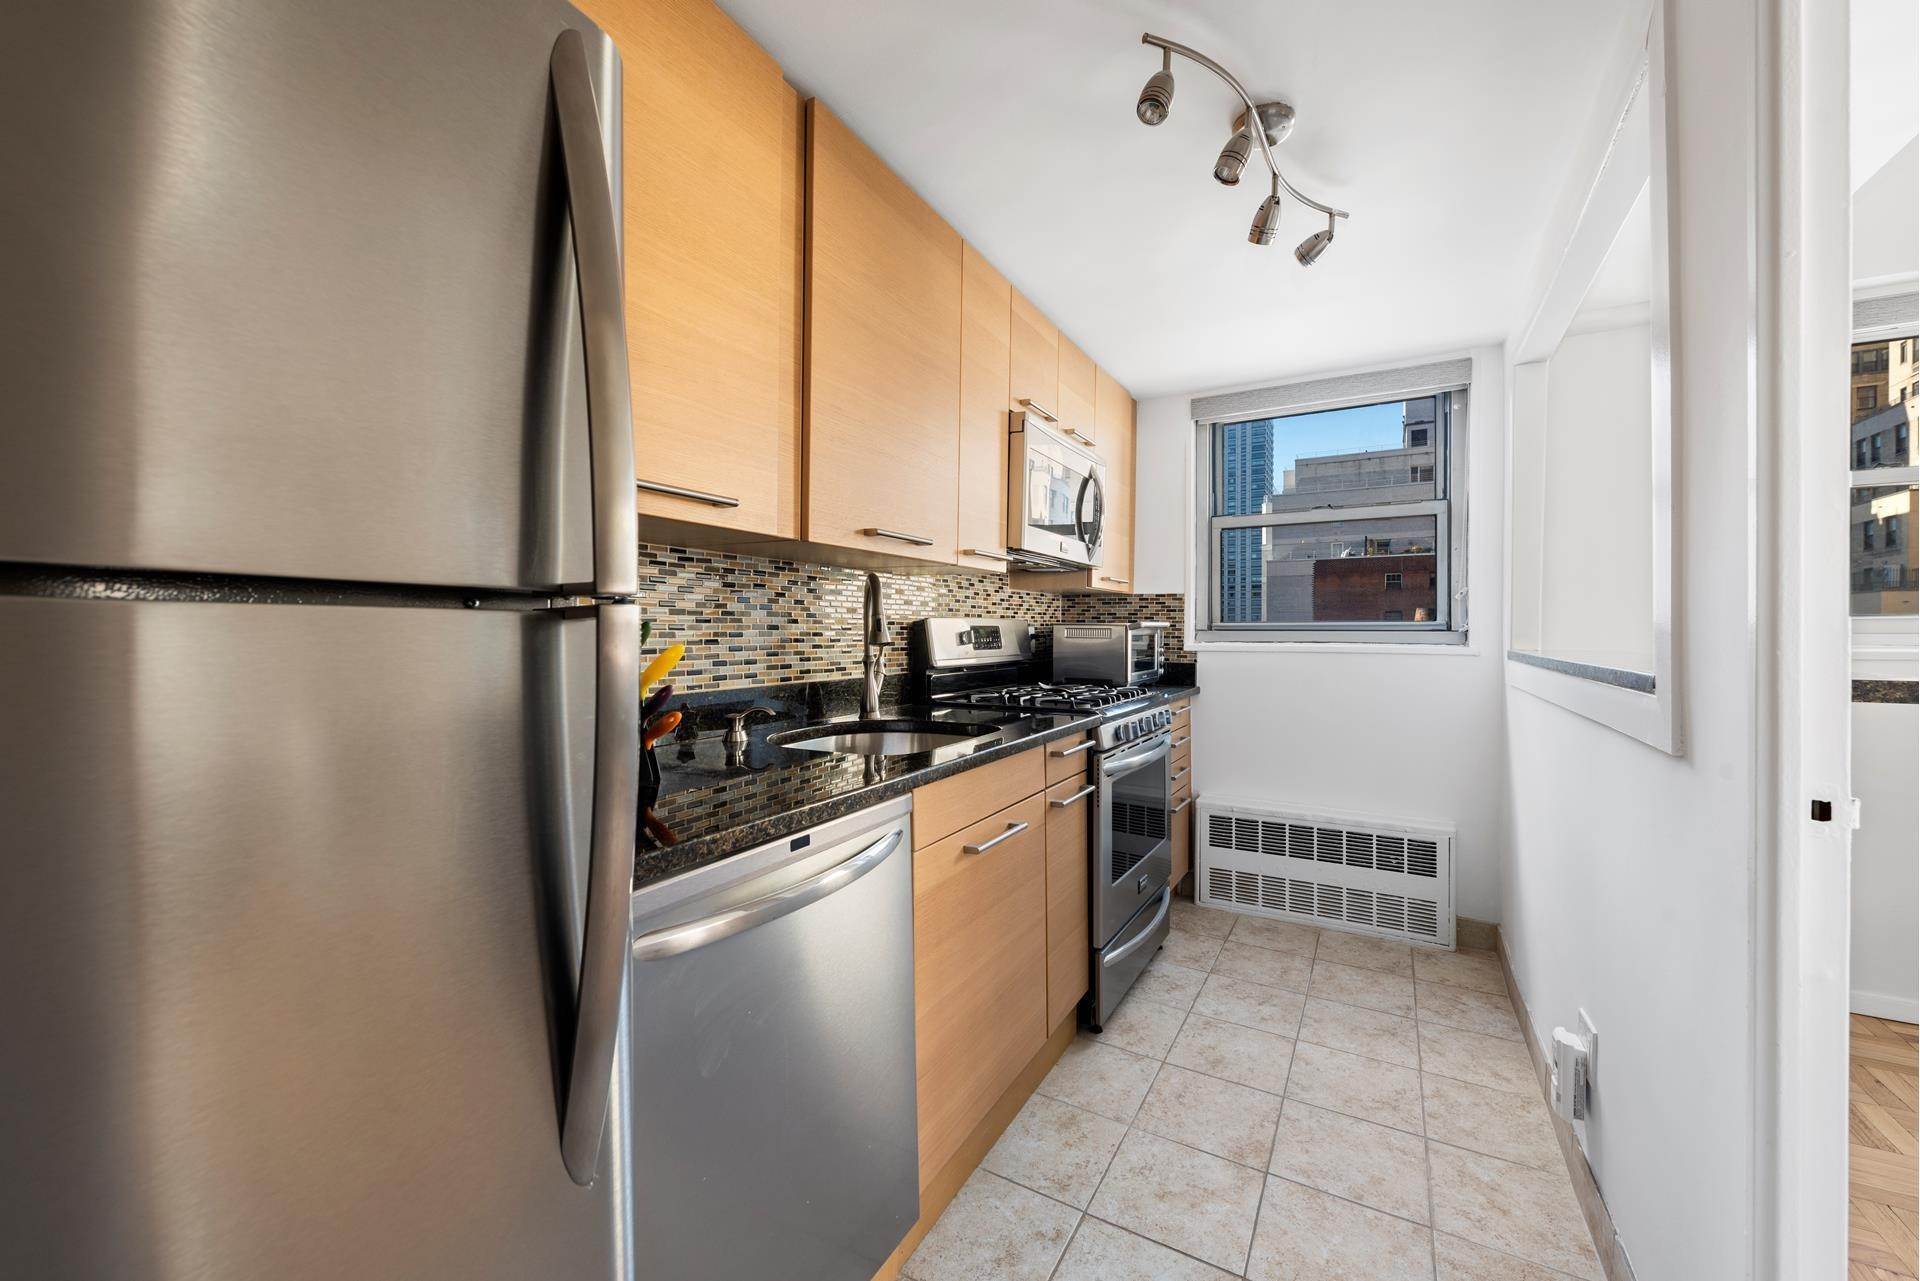 Cooperative for Sale at Upper East Side, Manhattan, NY 10021